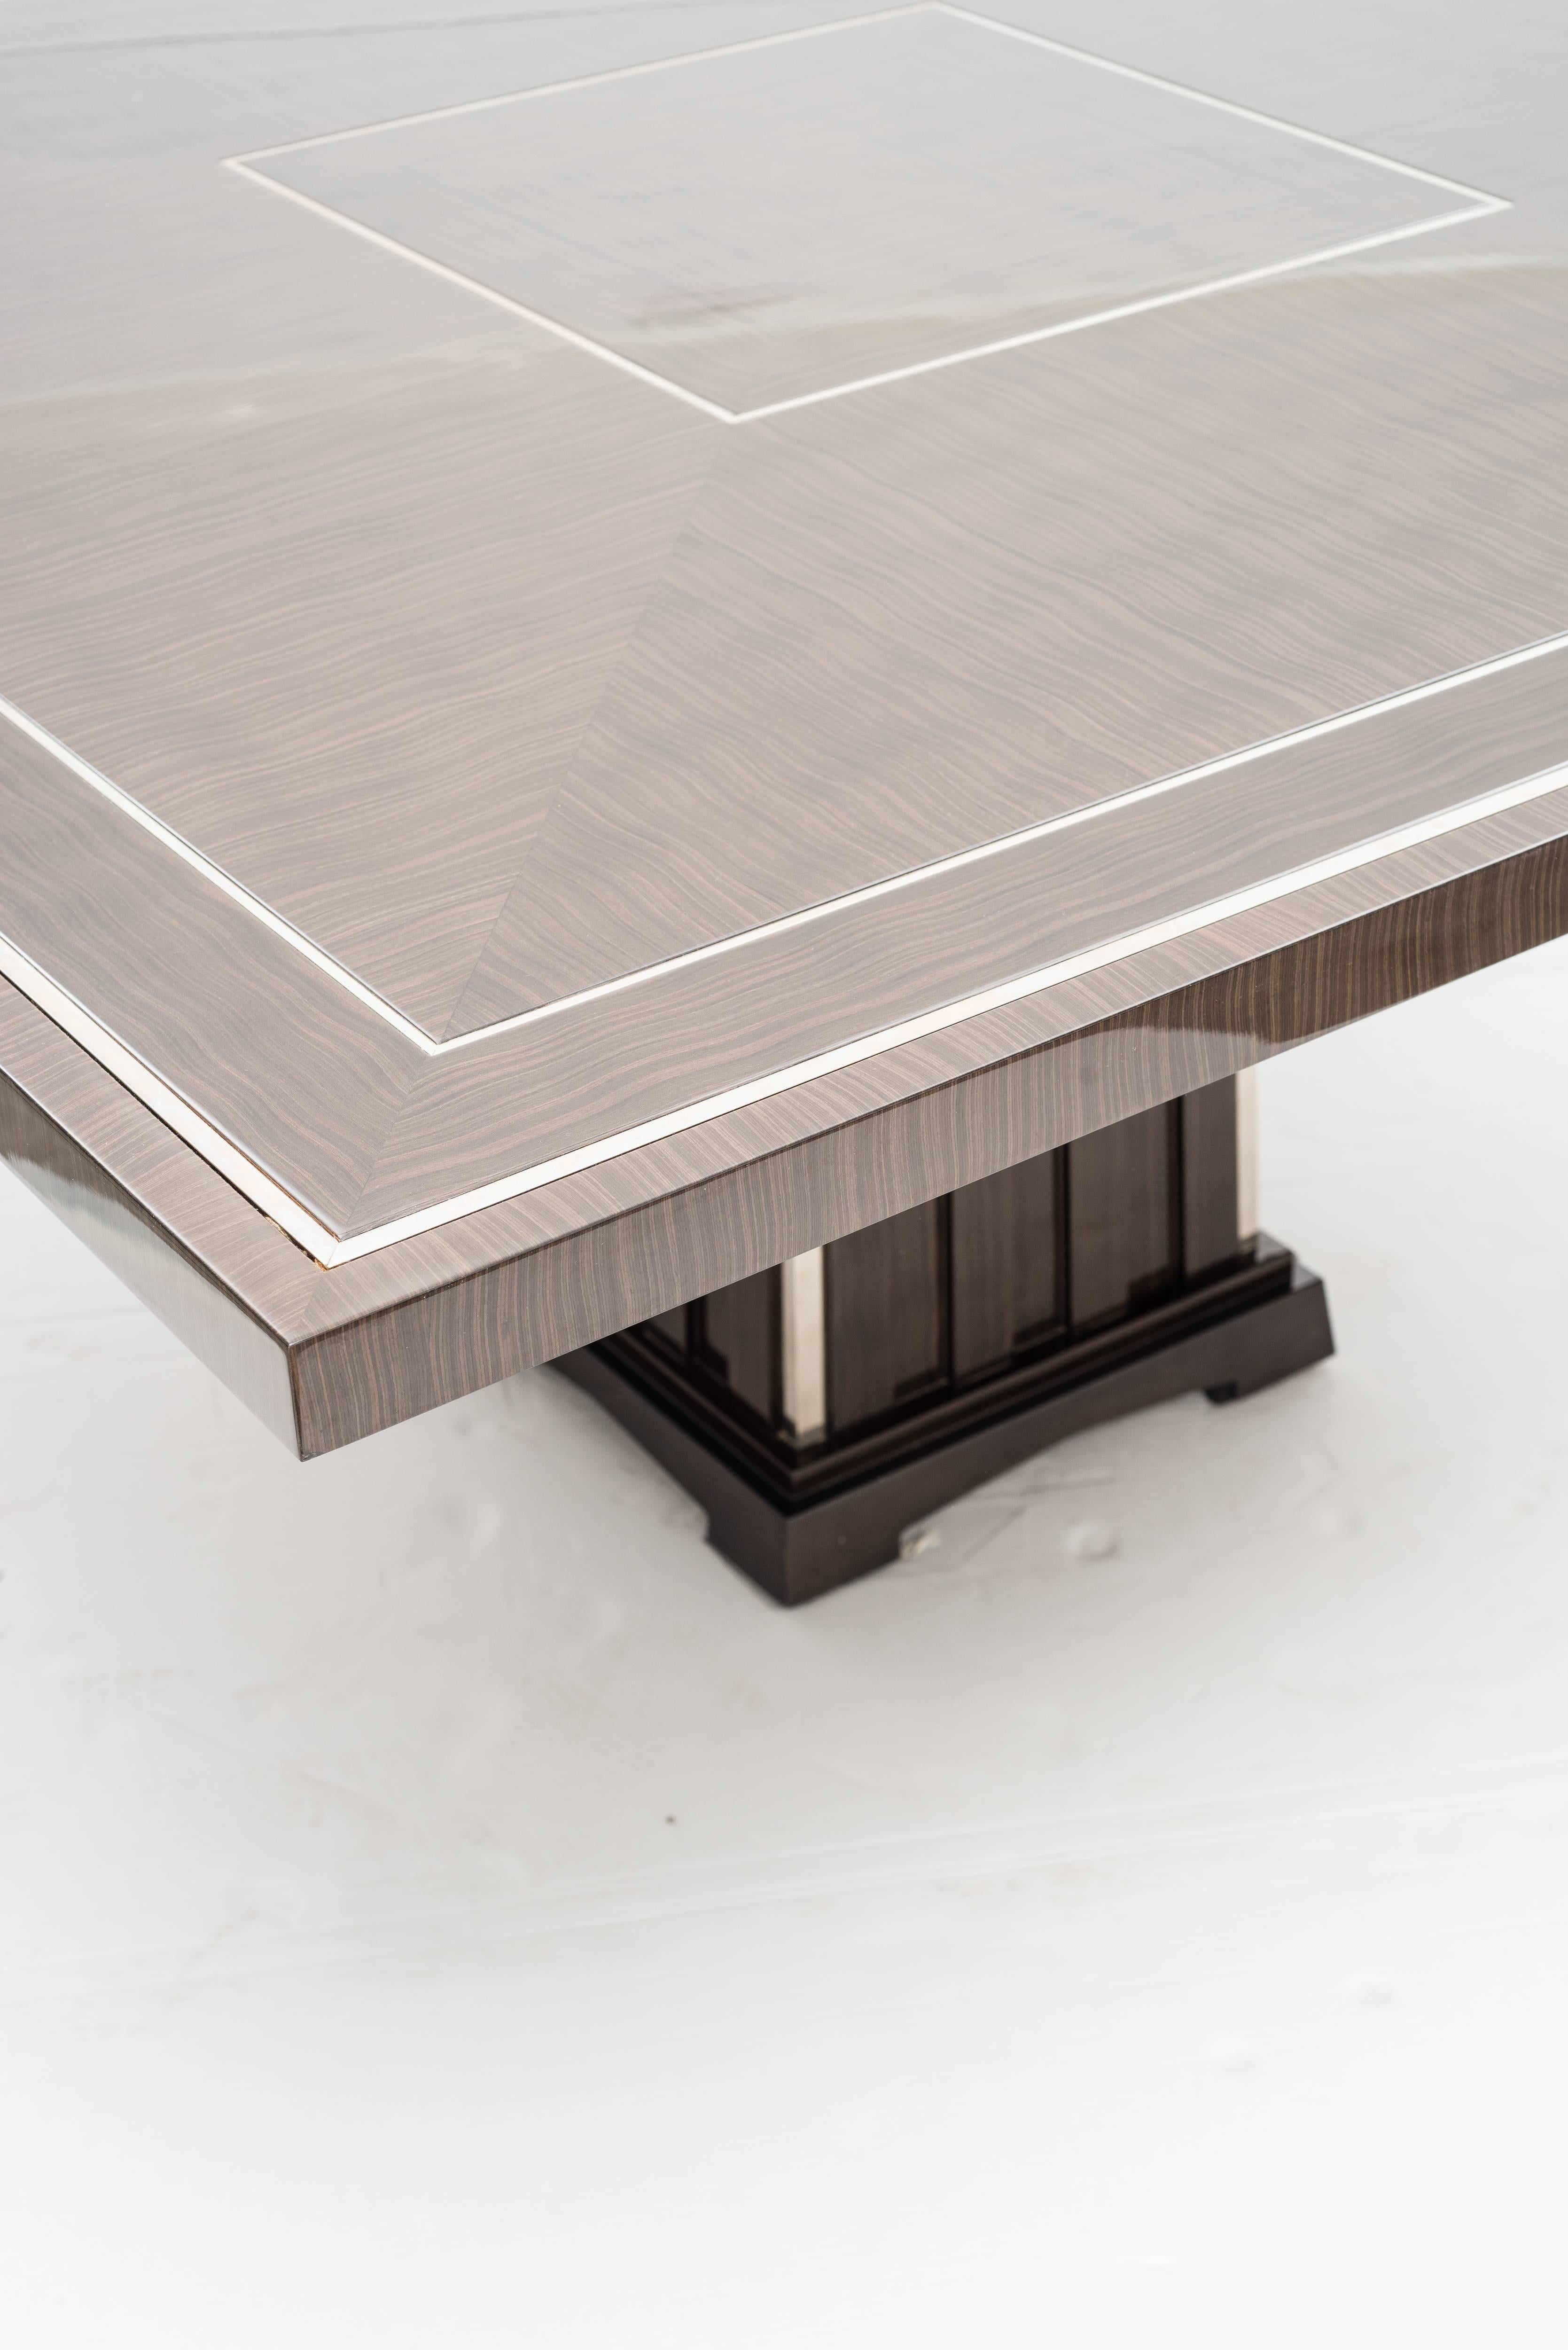 Italian Fine Bespoke Dining Room Table, Veneer Wood Top and Base with Chrome Inserts,